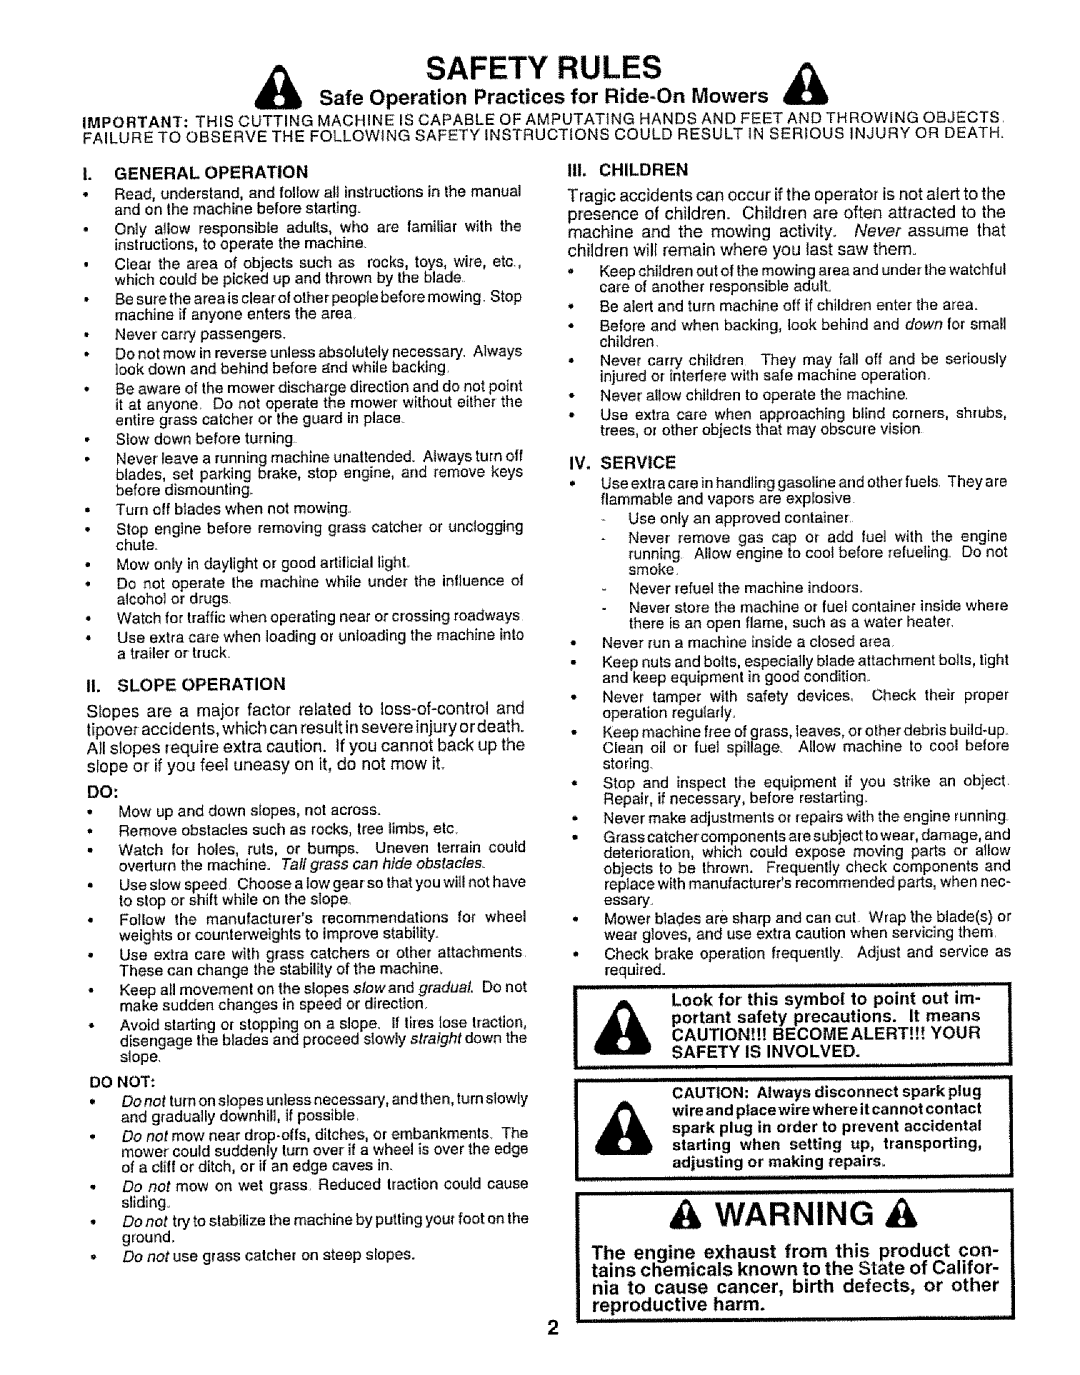 Sears 917.25953 owner manual Safety Rules, _k Safe Operation Practices for Ride-OnMowers, A Warning, IlL CHILDREN 